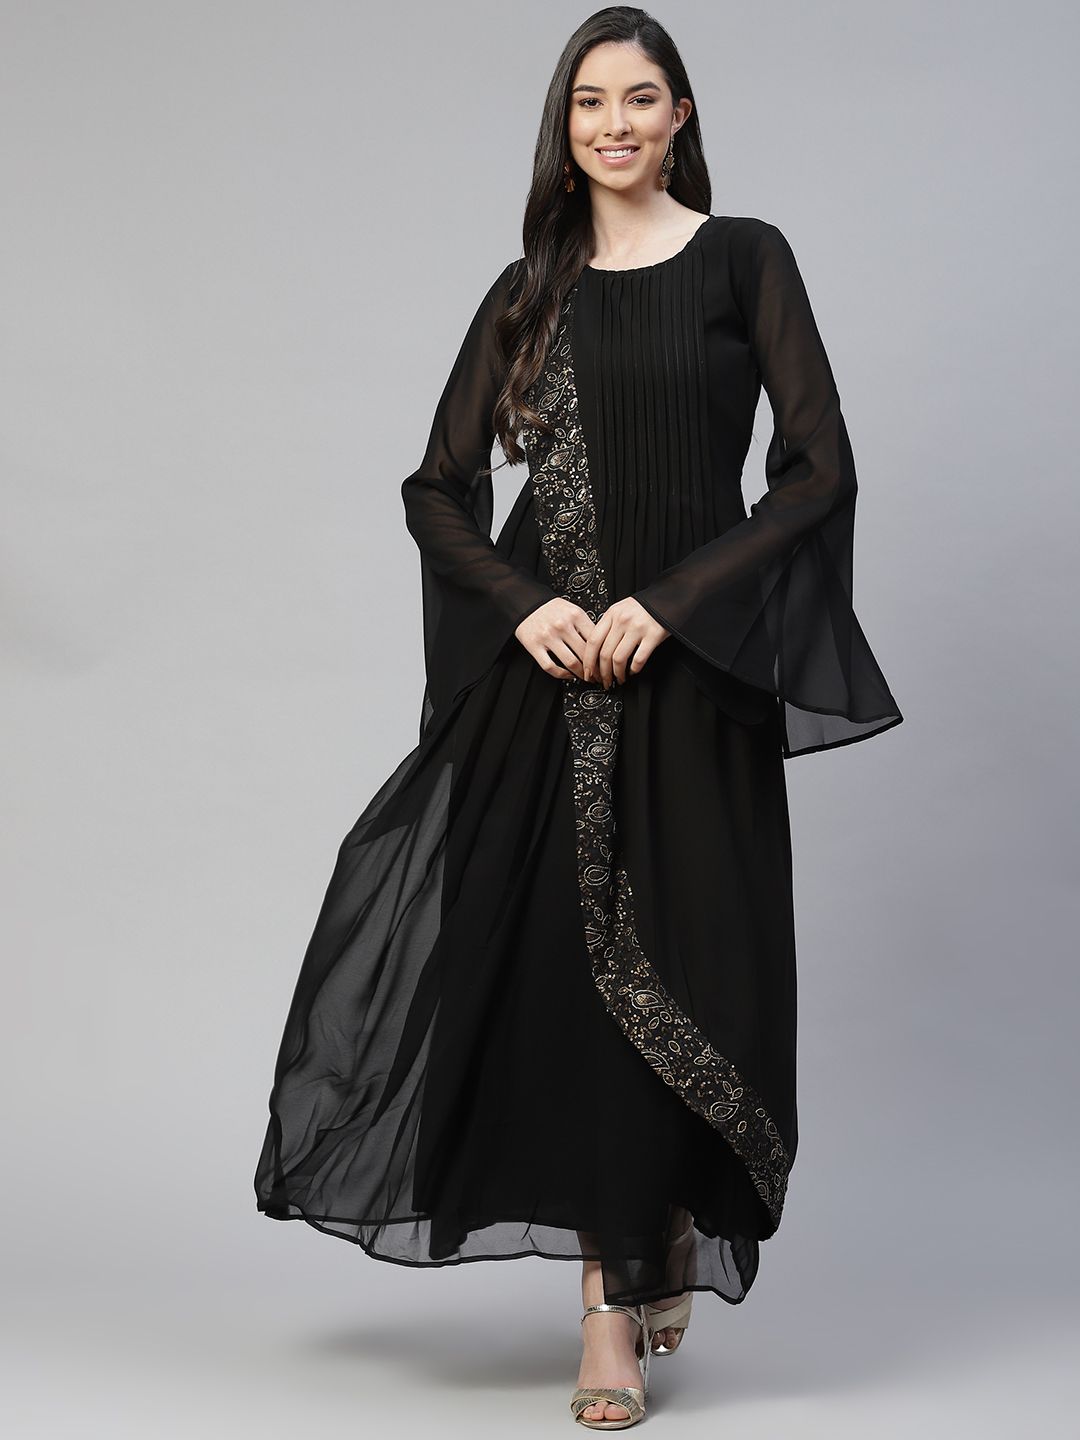 Cottinfab Black Ethnic Motifs Sequined A-Line Maxi Dress with Bell Sleeves Price in India